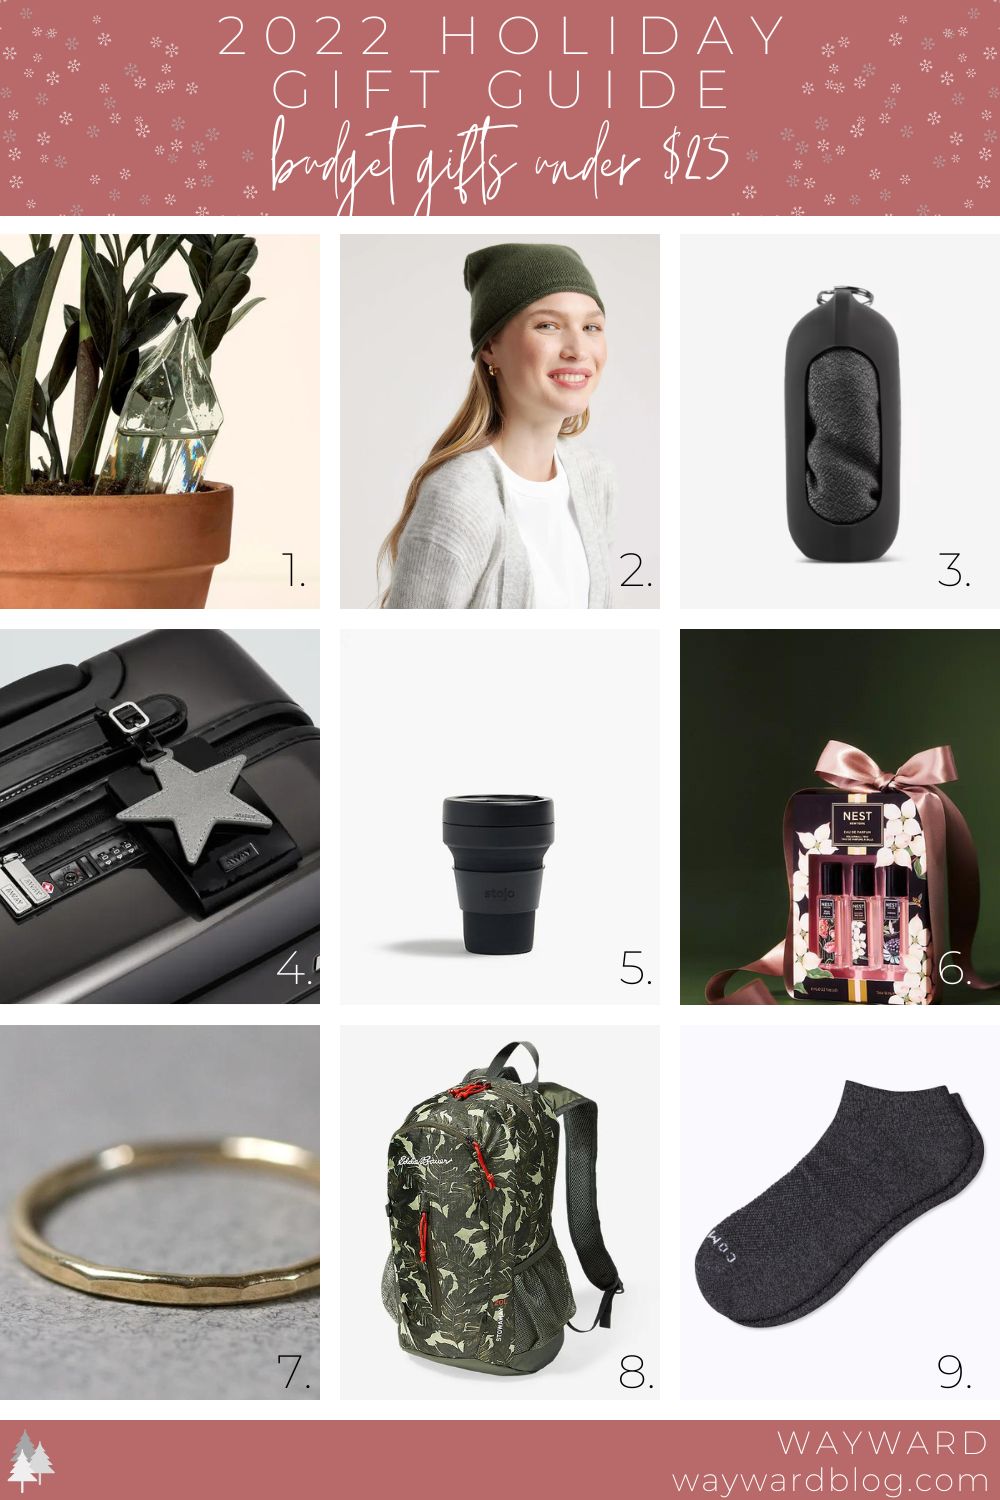 Collage of images in the Budget Gifts gift guide